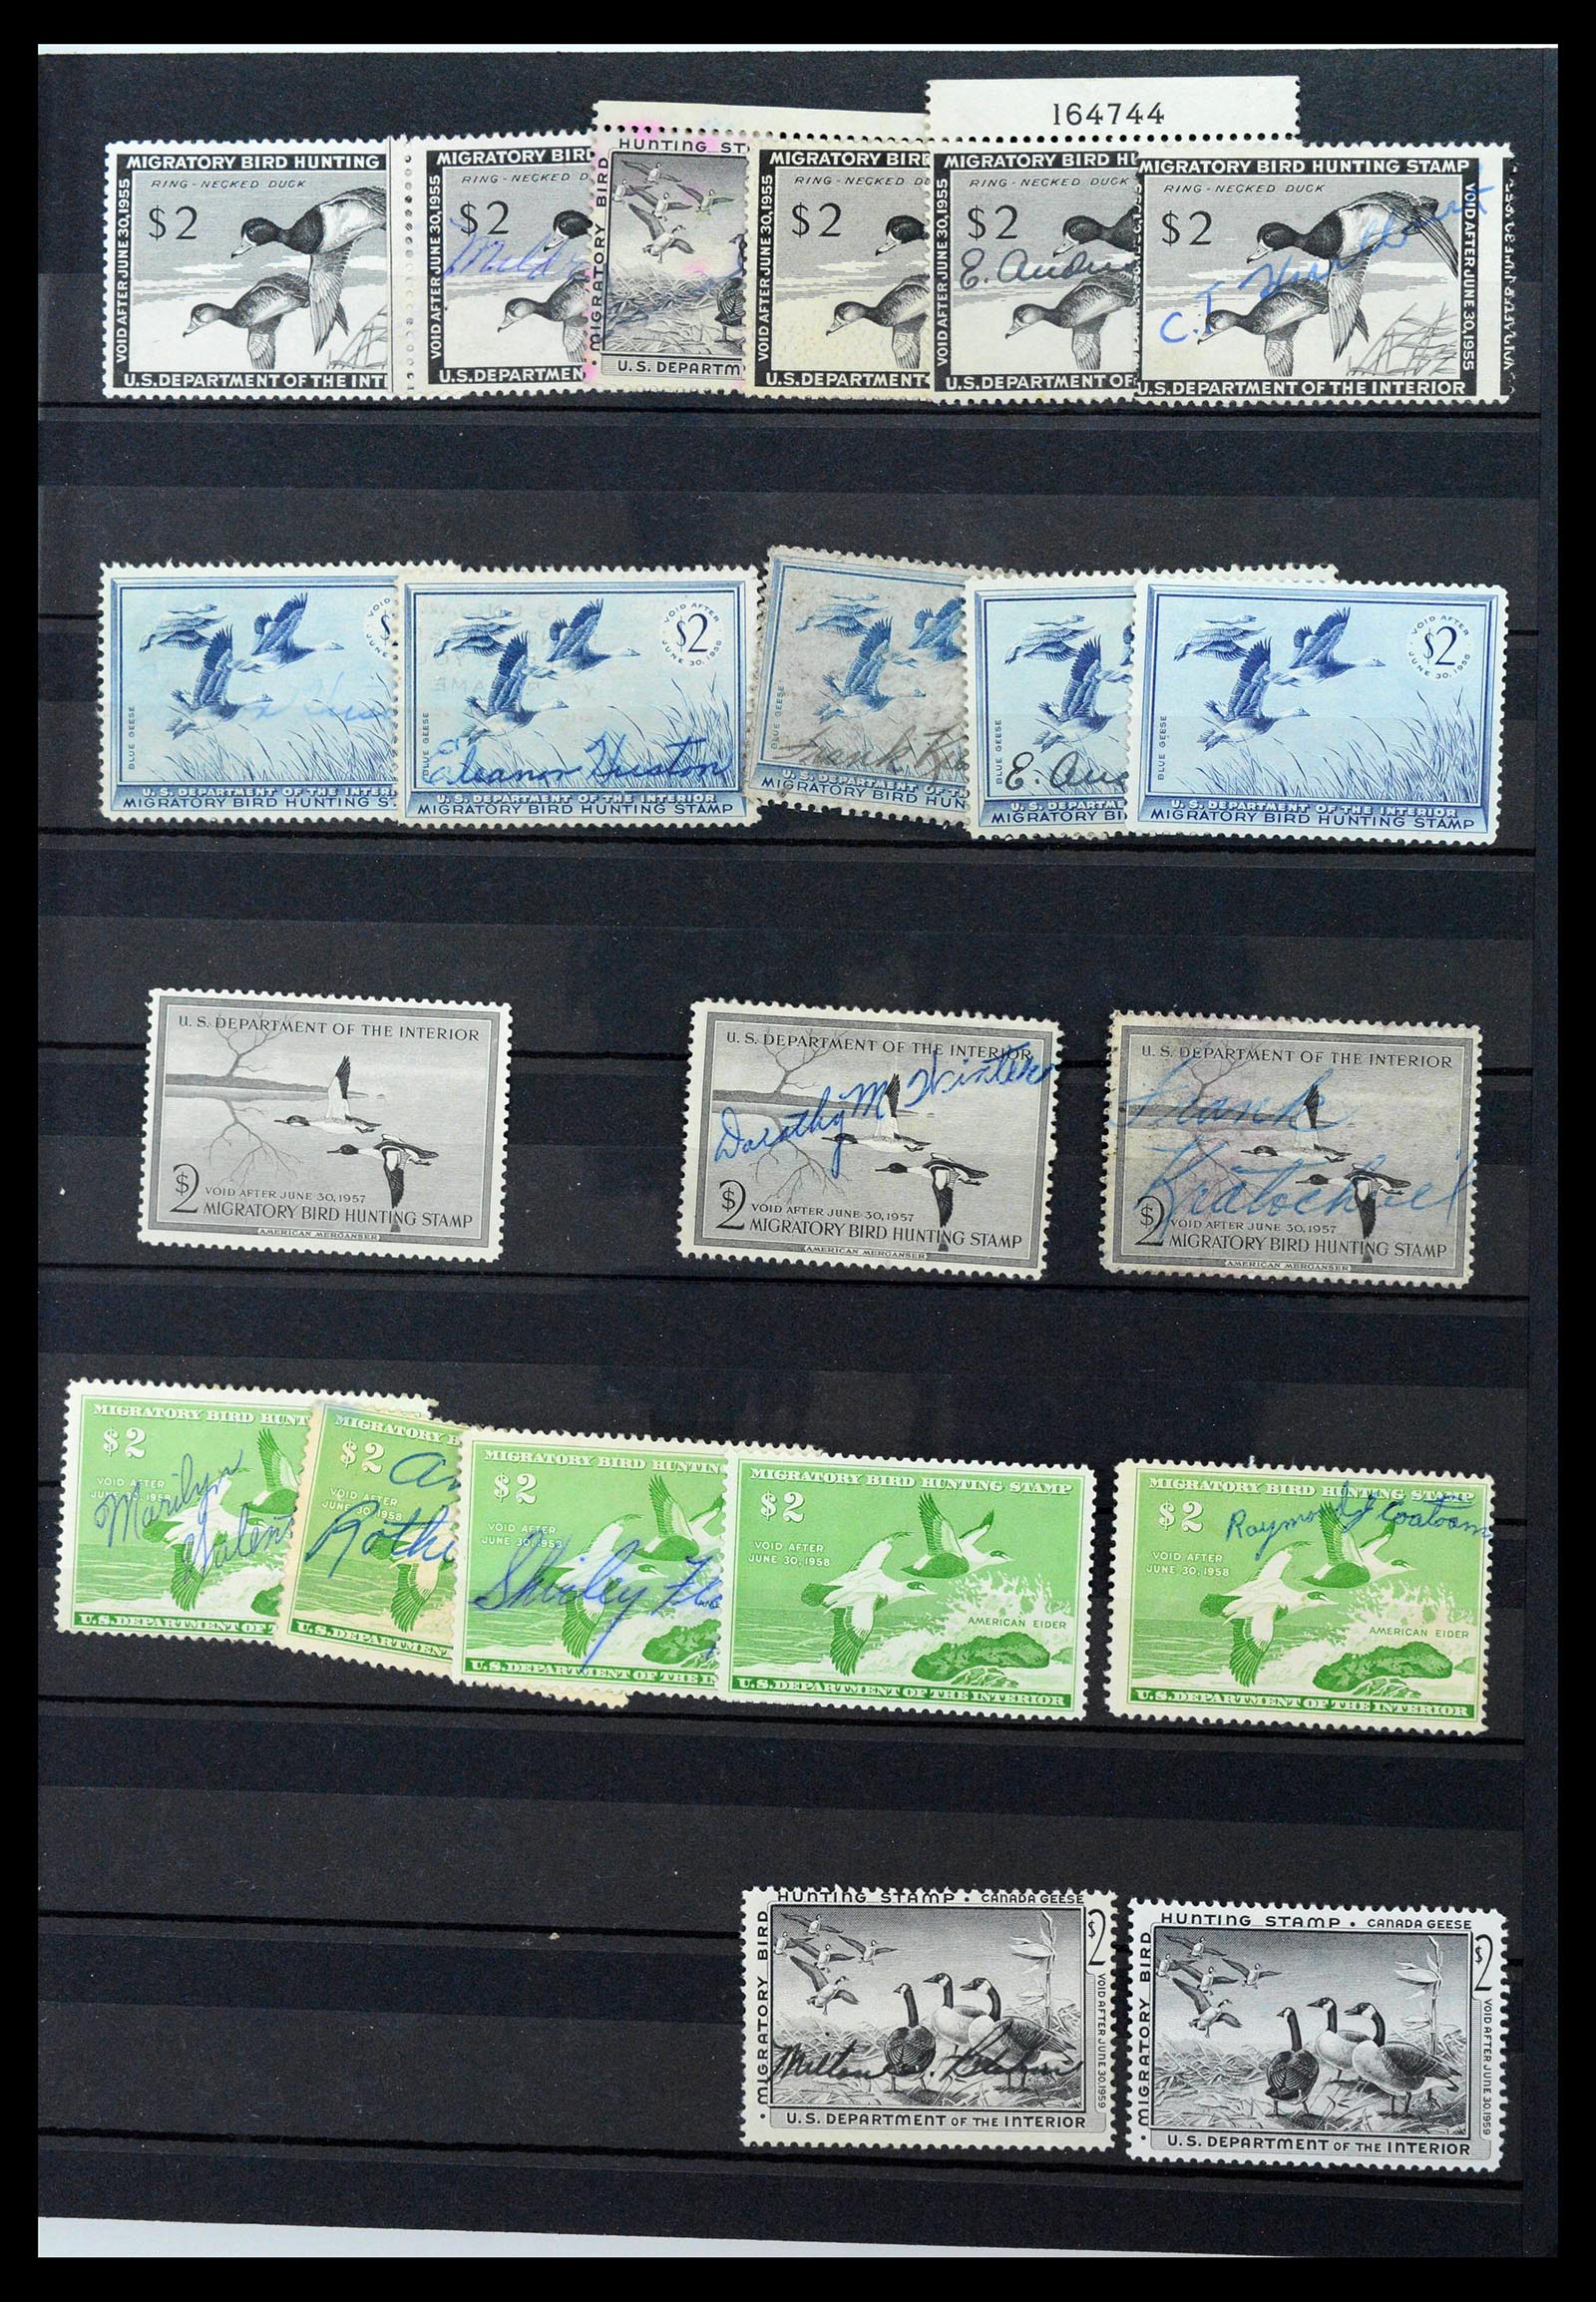 39426 0005 - Stamp collection 39426 USA duckstamps 1934-2007.